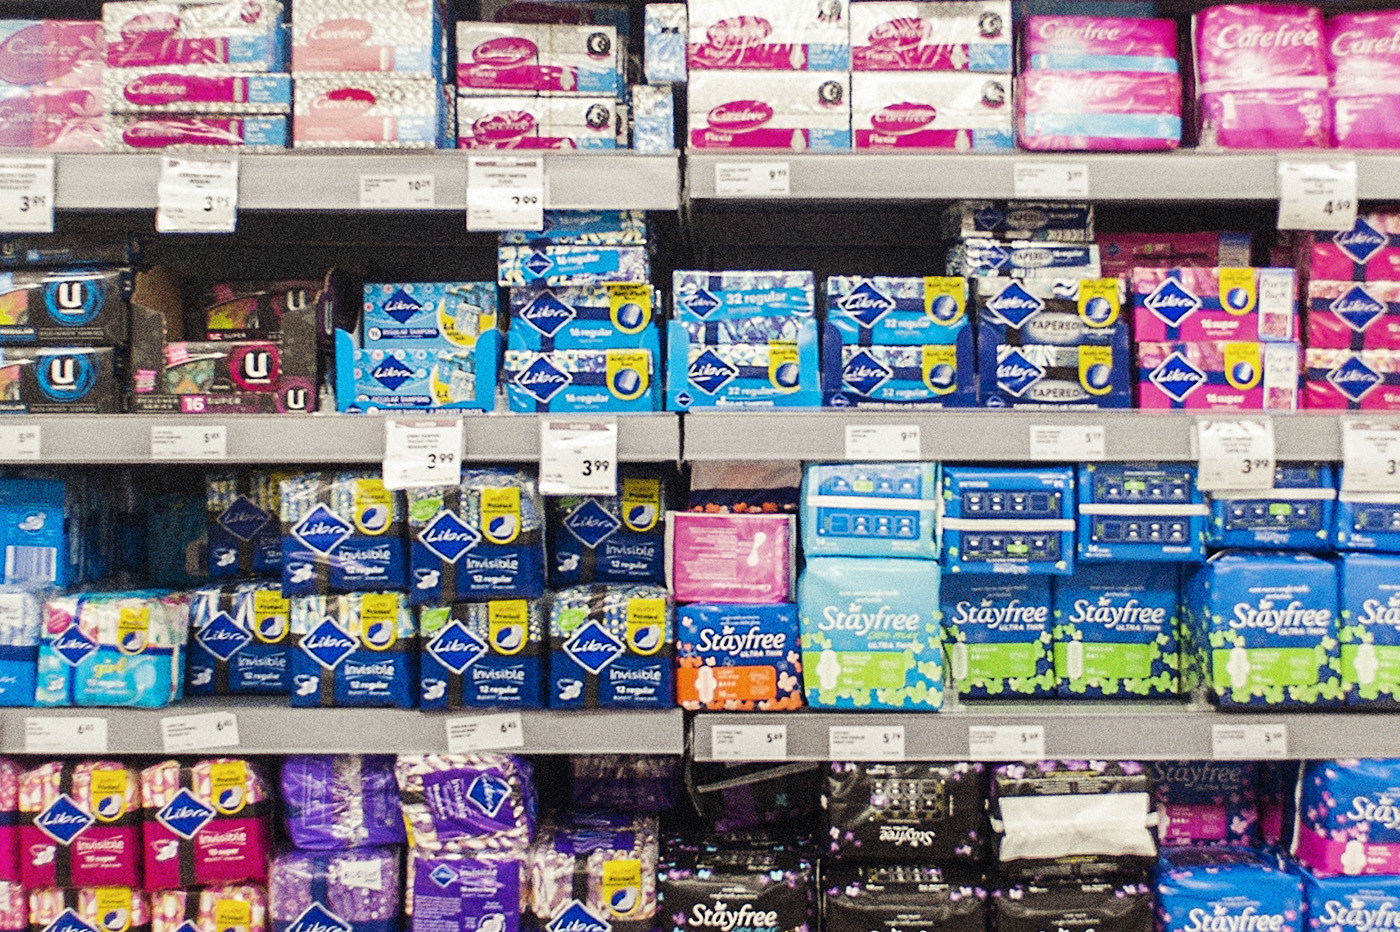 A big display of the various tampons and sanitary pads available in NZ